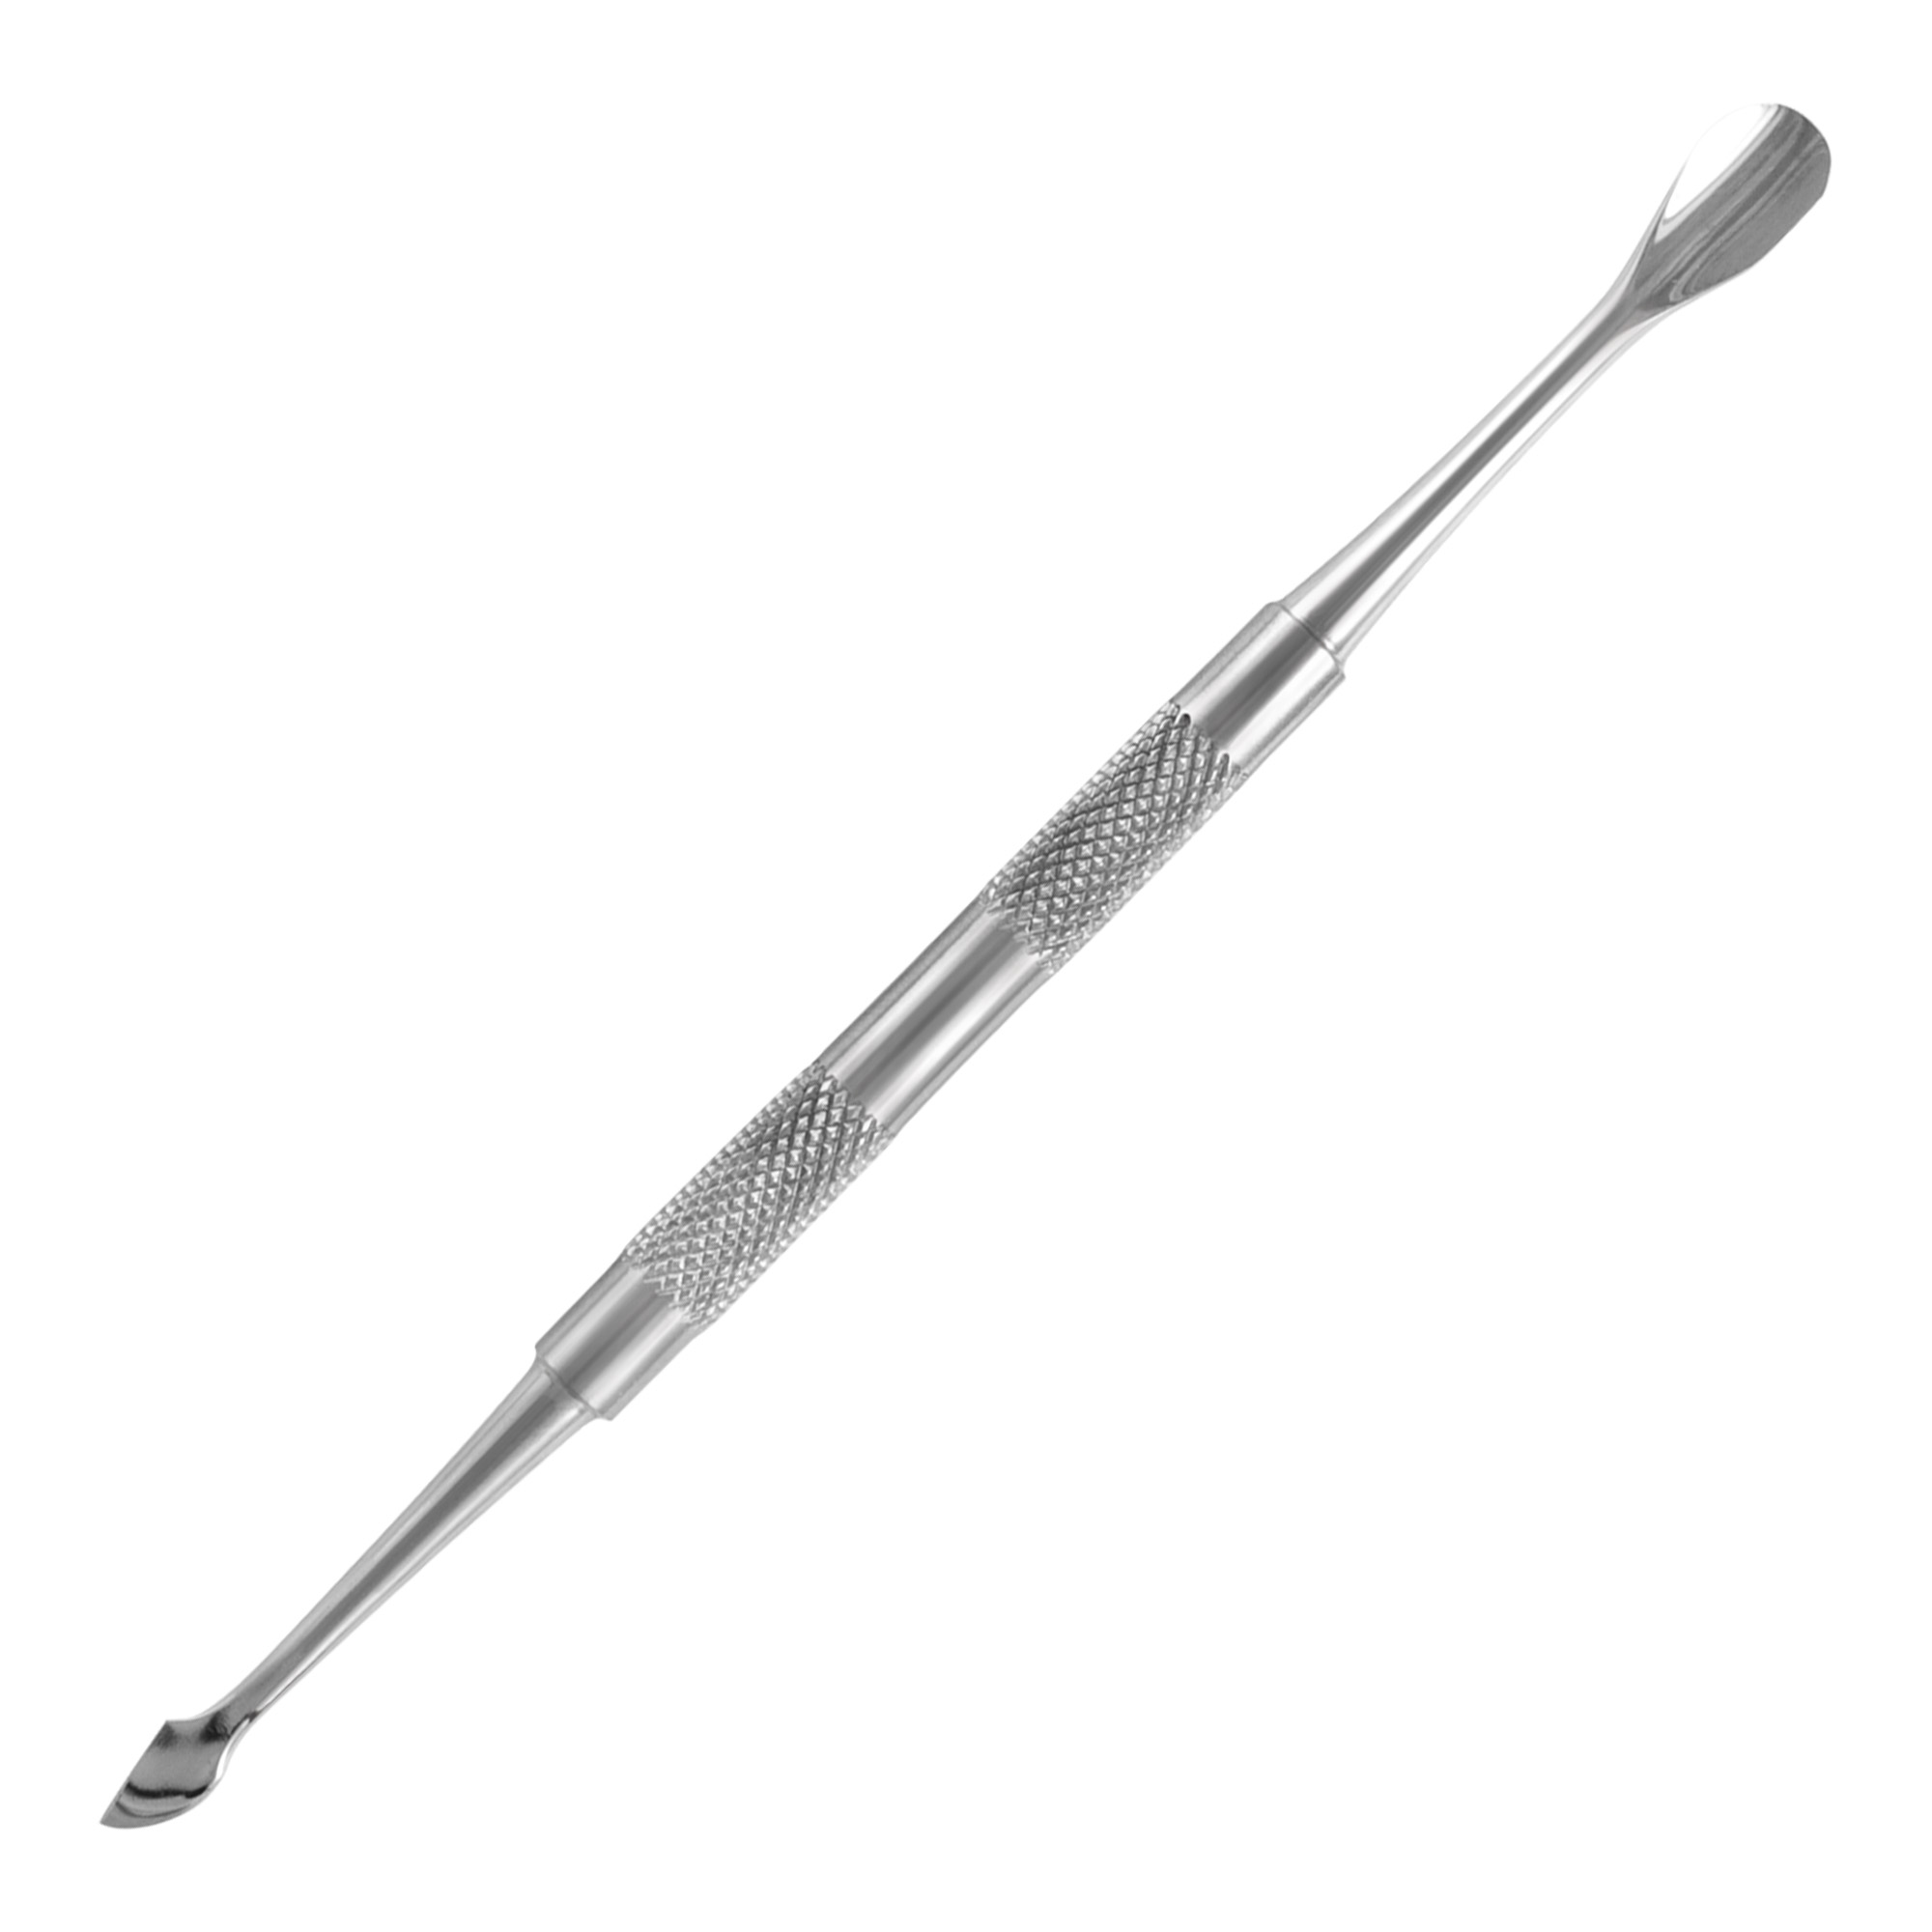 Professional stainless steel cuticle pusher with double concave and lanceolate tip